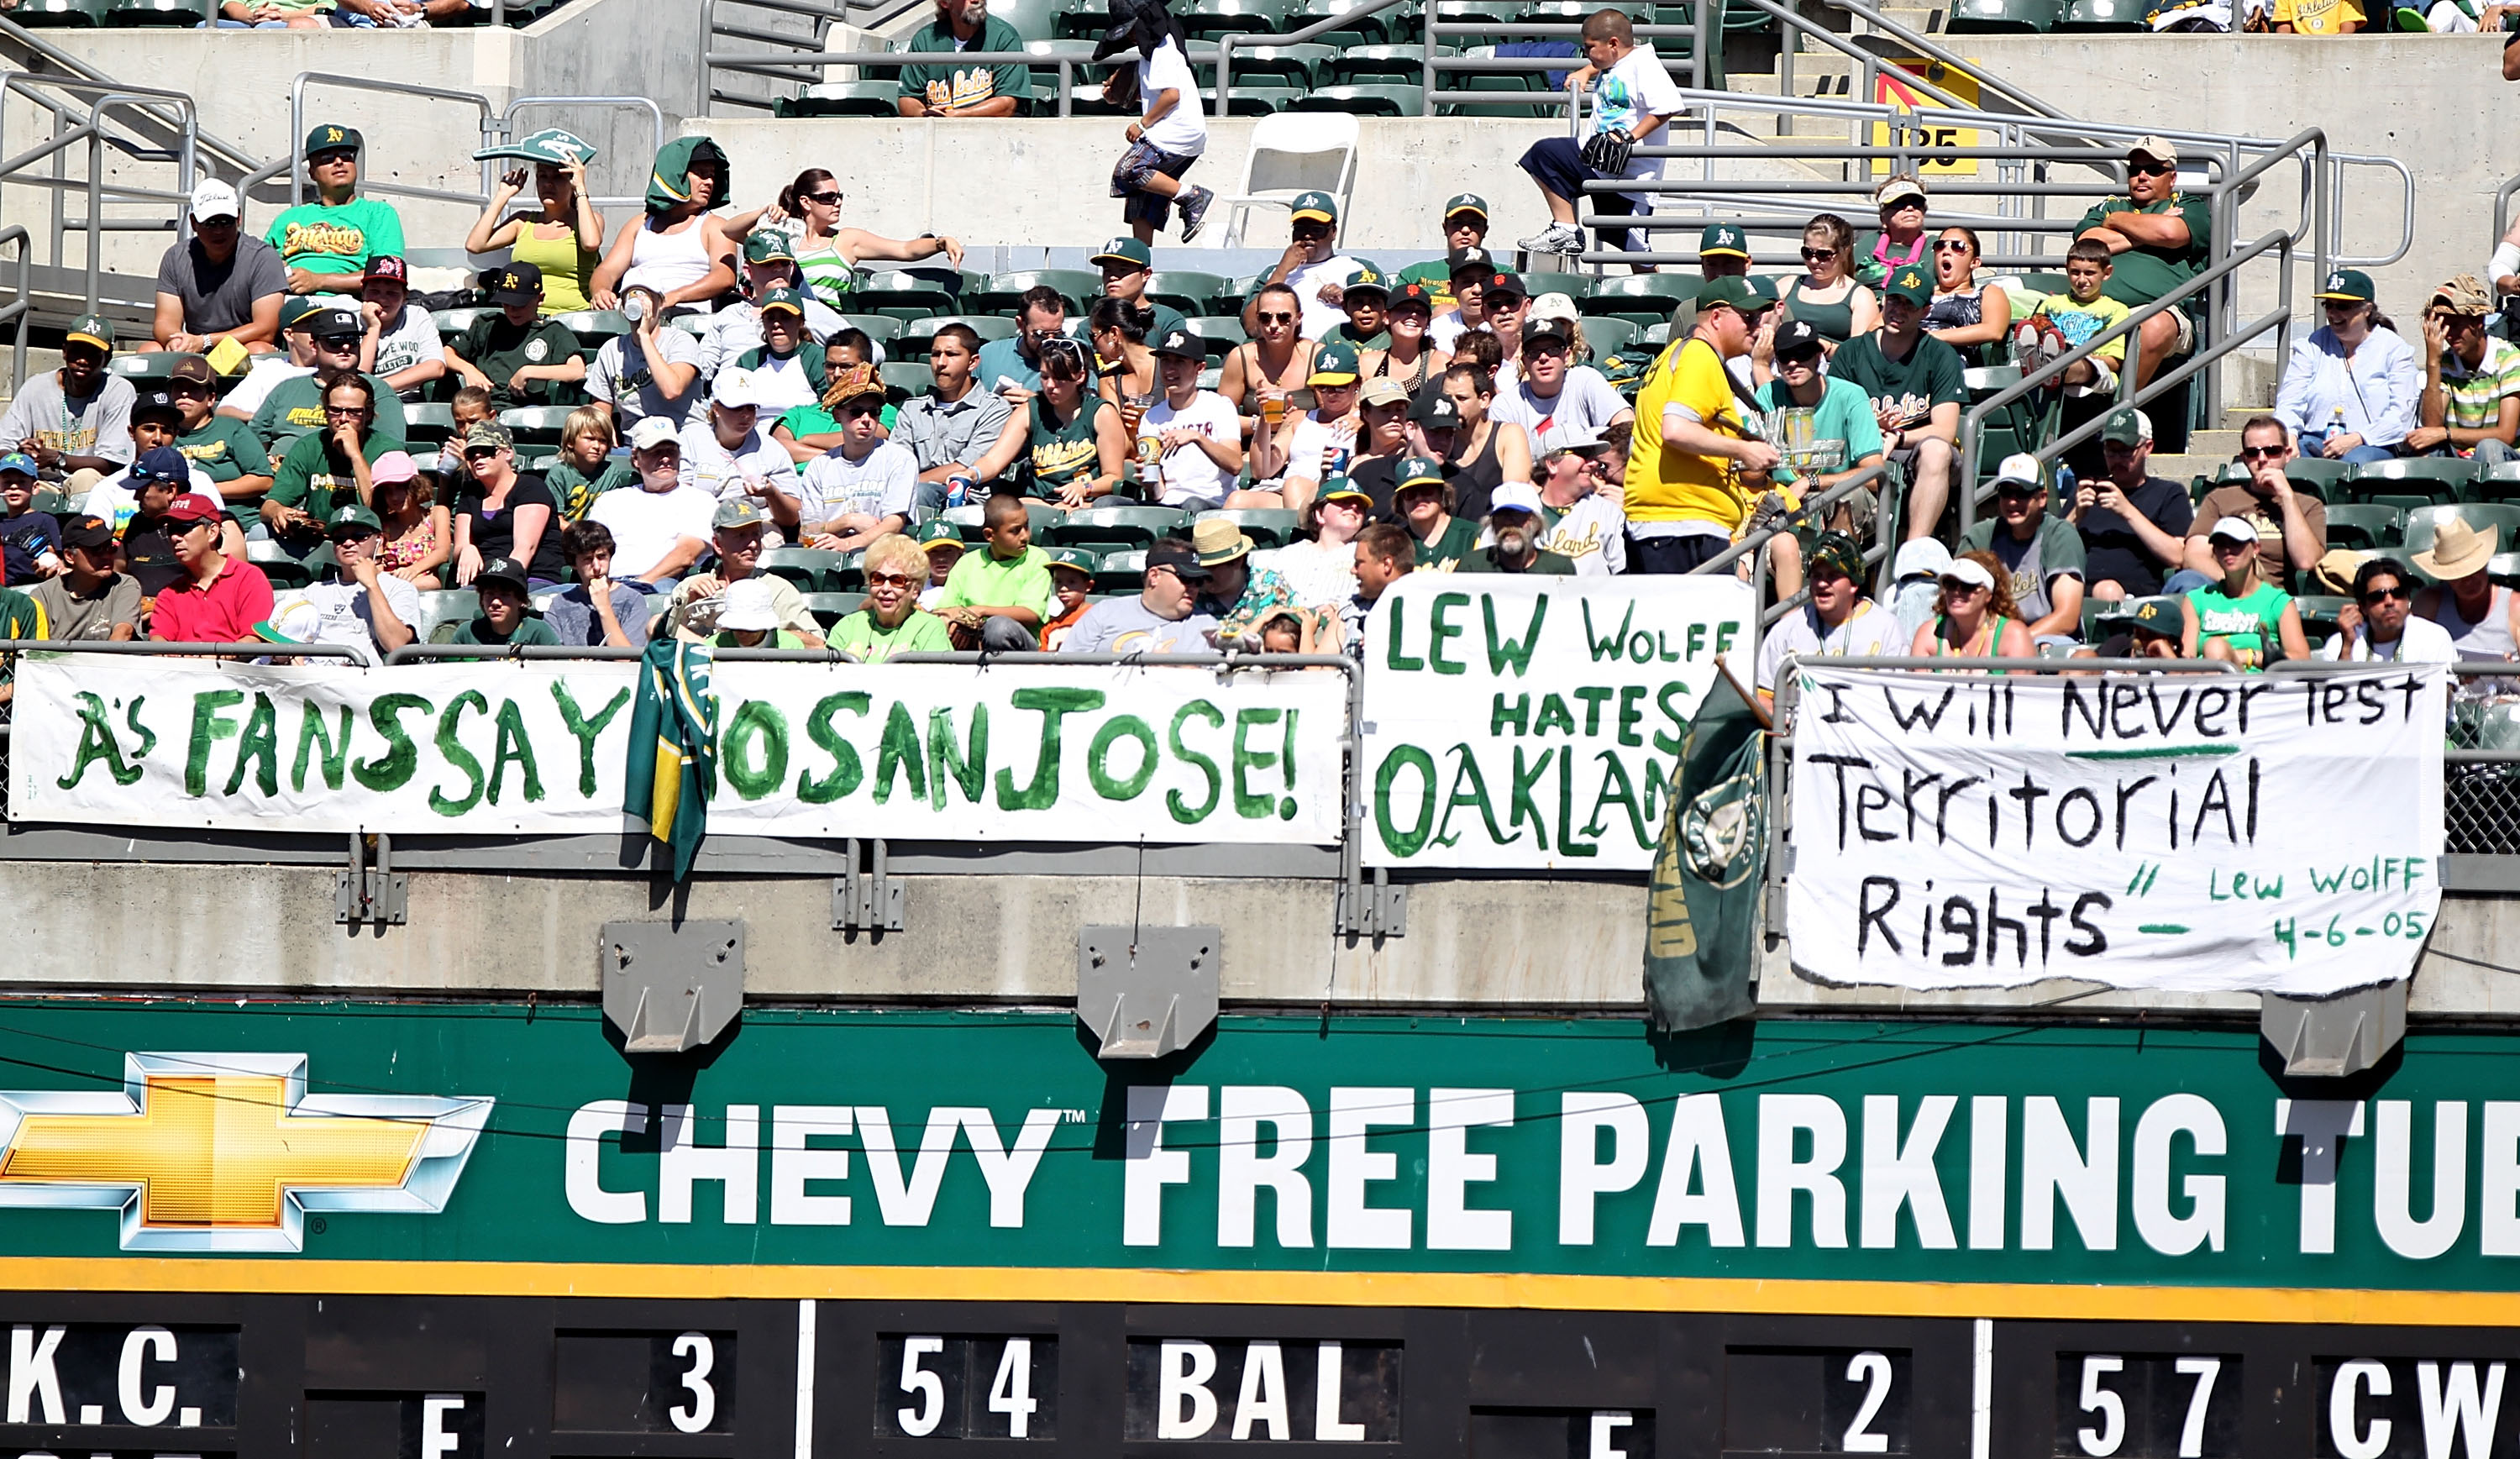 The 4 Major League Baseball Fan Bases With The Most Class